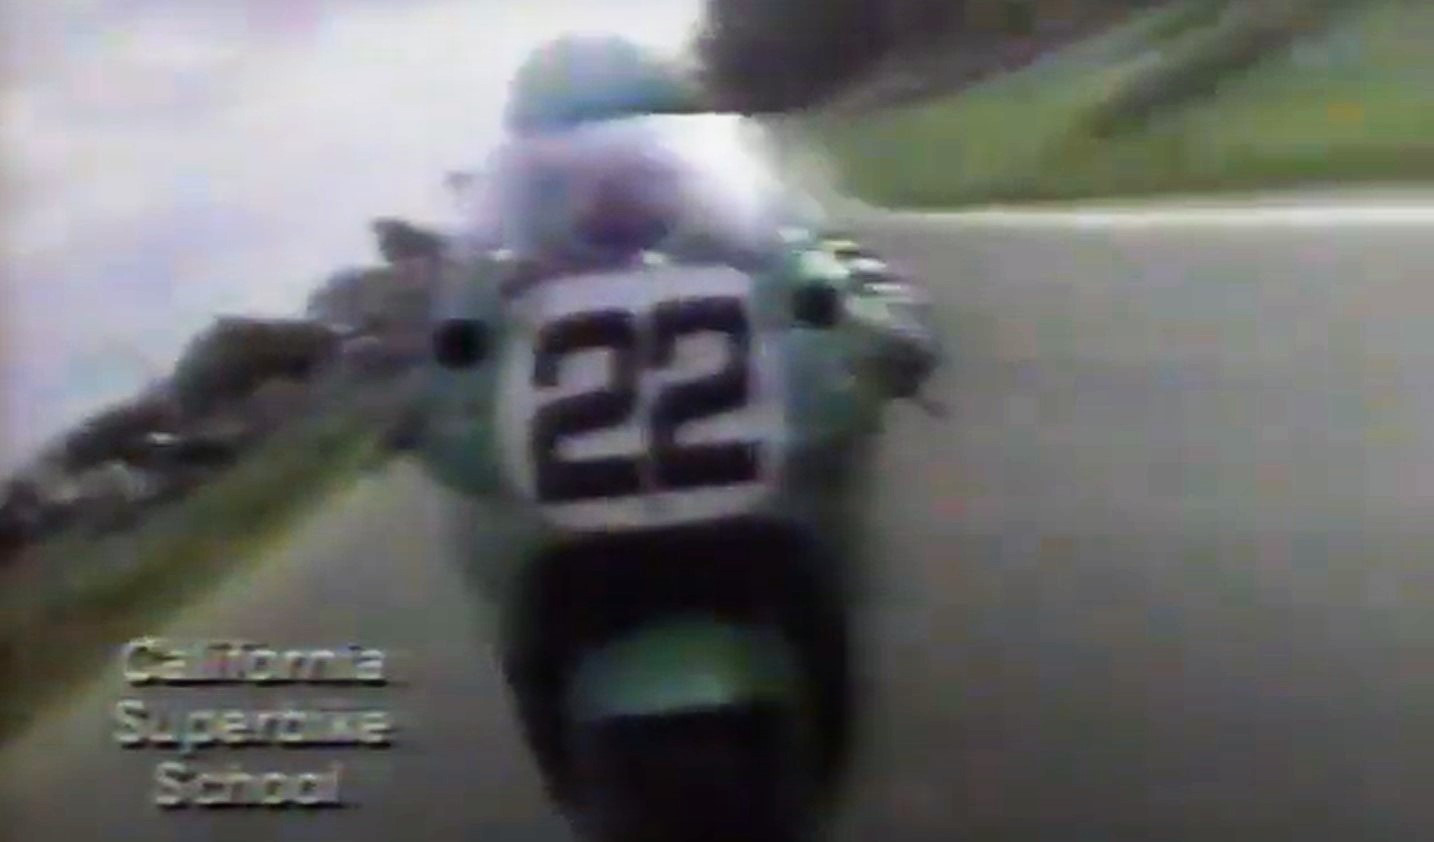 Scott Russell (22), riding a Muzzy Kawasaki ZX-7 Superbike, fills the on-board camera shot from the back of Chuck Graves' Suzuki GSX-R1100 Superbike during the coverage of a Formula USA race at Road Atlanta in 1990.